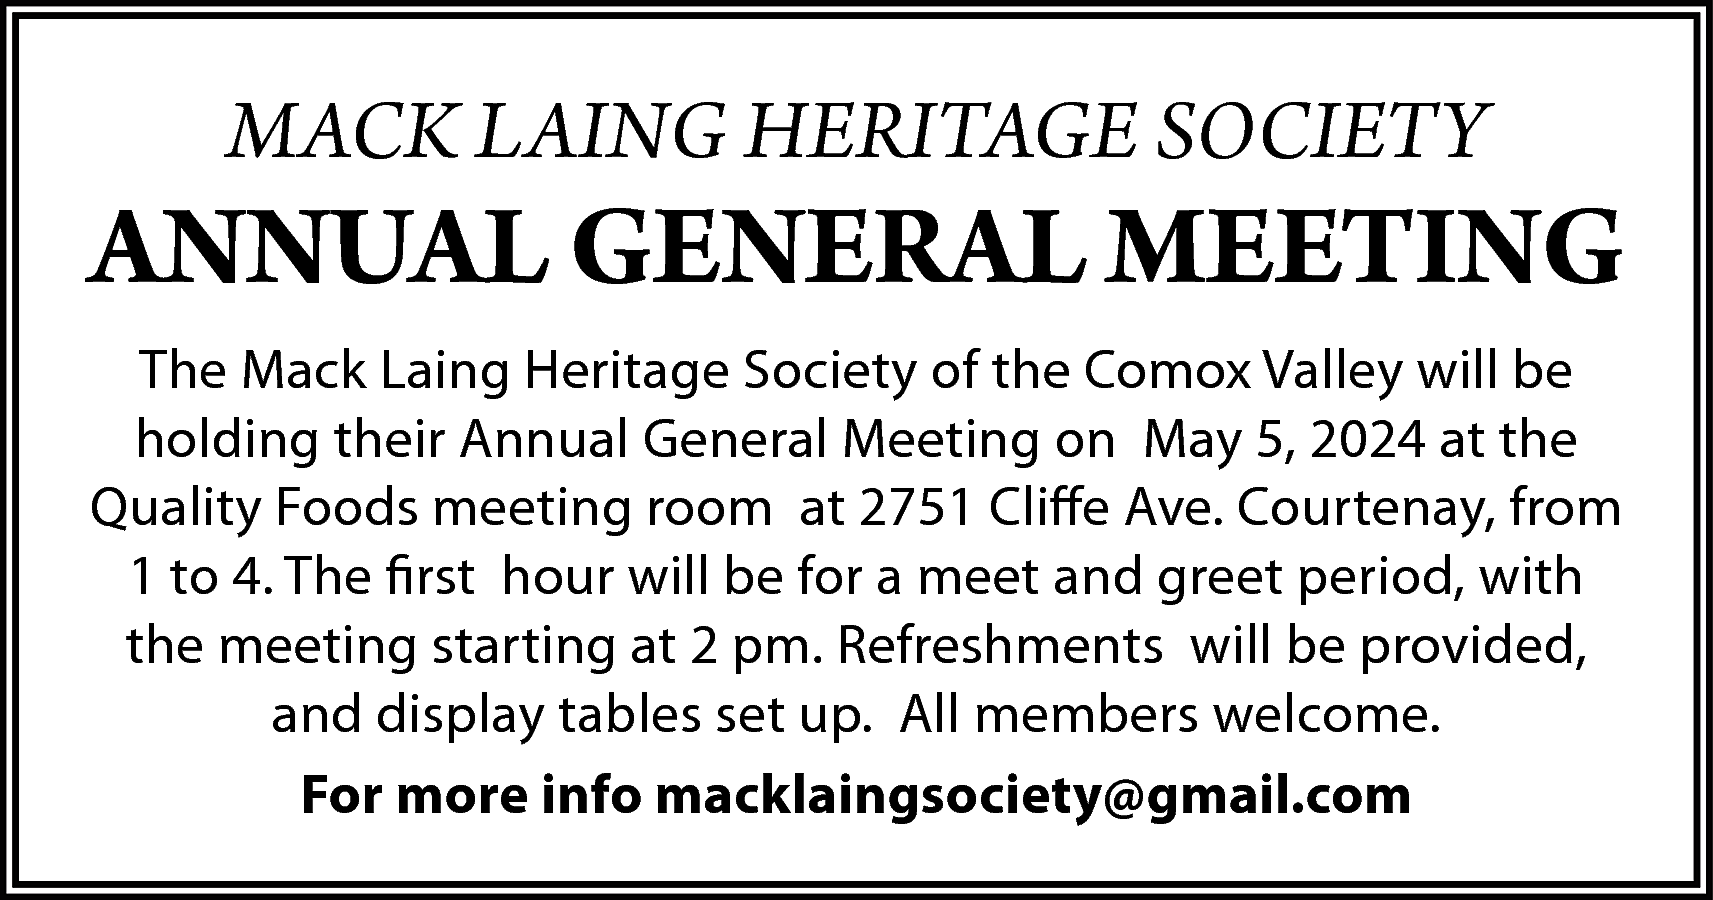 MACK LAING HERITAGE SOCIETY <br>  MACK LAING HERITAGE SOCIETY    ANNUAL GENERAL MEETING  The Mack Laing Heritage Society of the Comox Valley will be  holding their Annual General Meeting on May 5, 2024 at the  Quality Foods meeting room at 2751 Cliffe Ave. Courtenay, from  1 to 4. The first hour will be for a meet and greet period, with  the meeting starting at 2 pm. Refreshments will be provided,  and display tables set up. All members welcome.  For more info macklaingsociety@gmail.com    